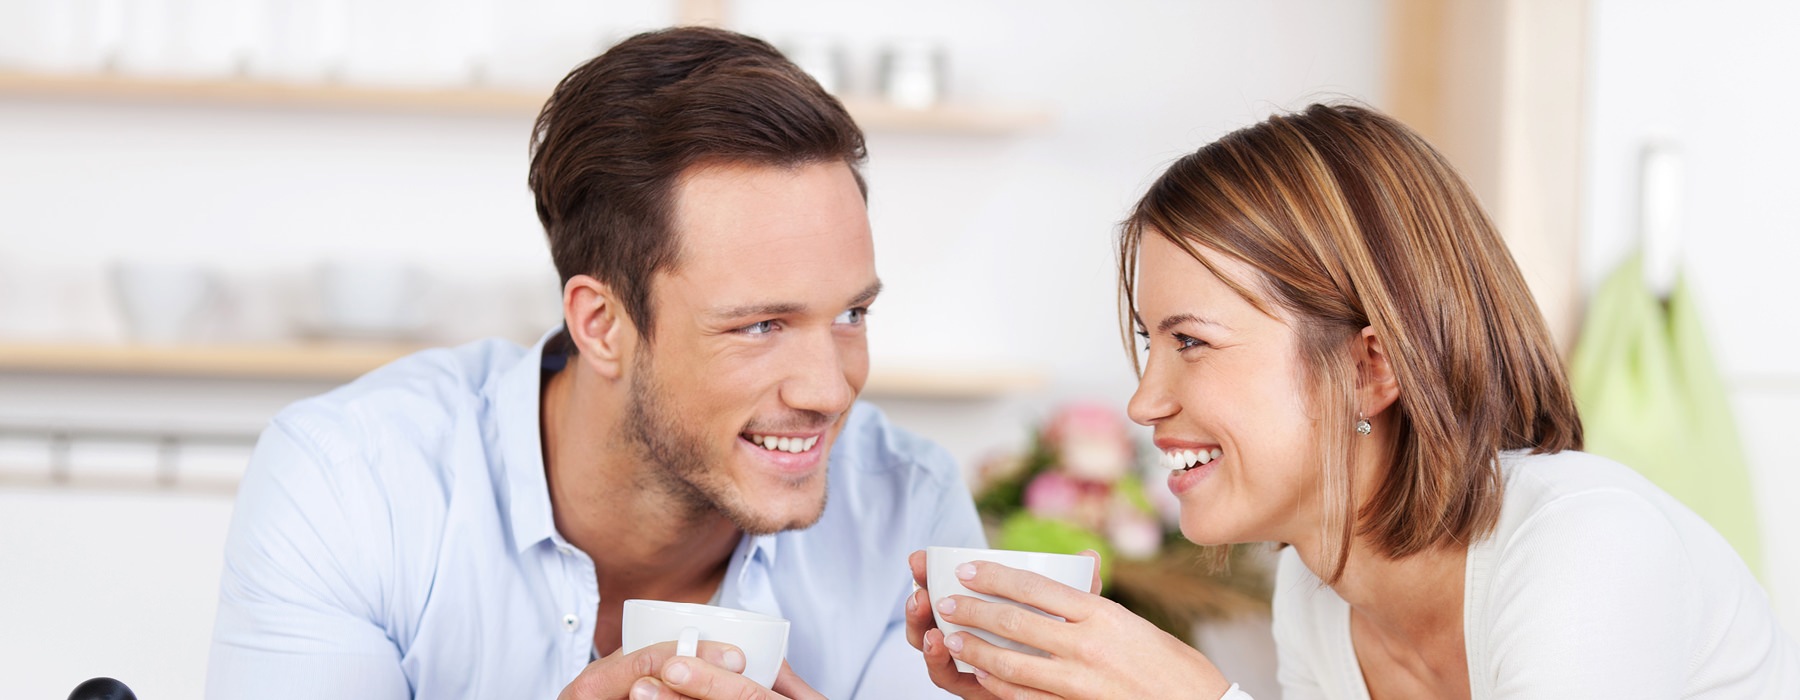 young couple smile at each other in the kitchen over breakfast